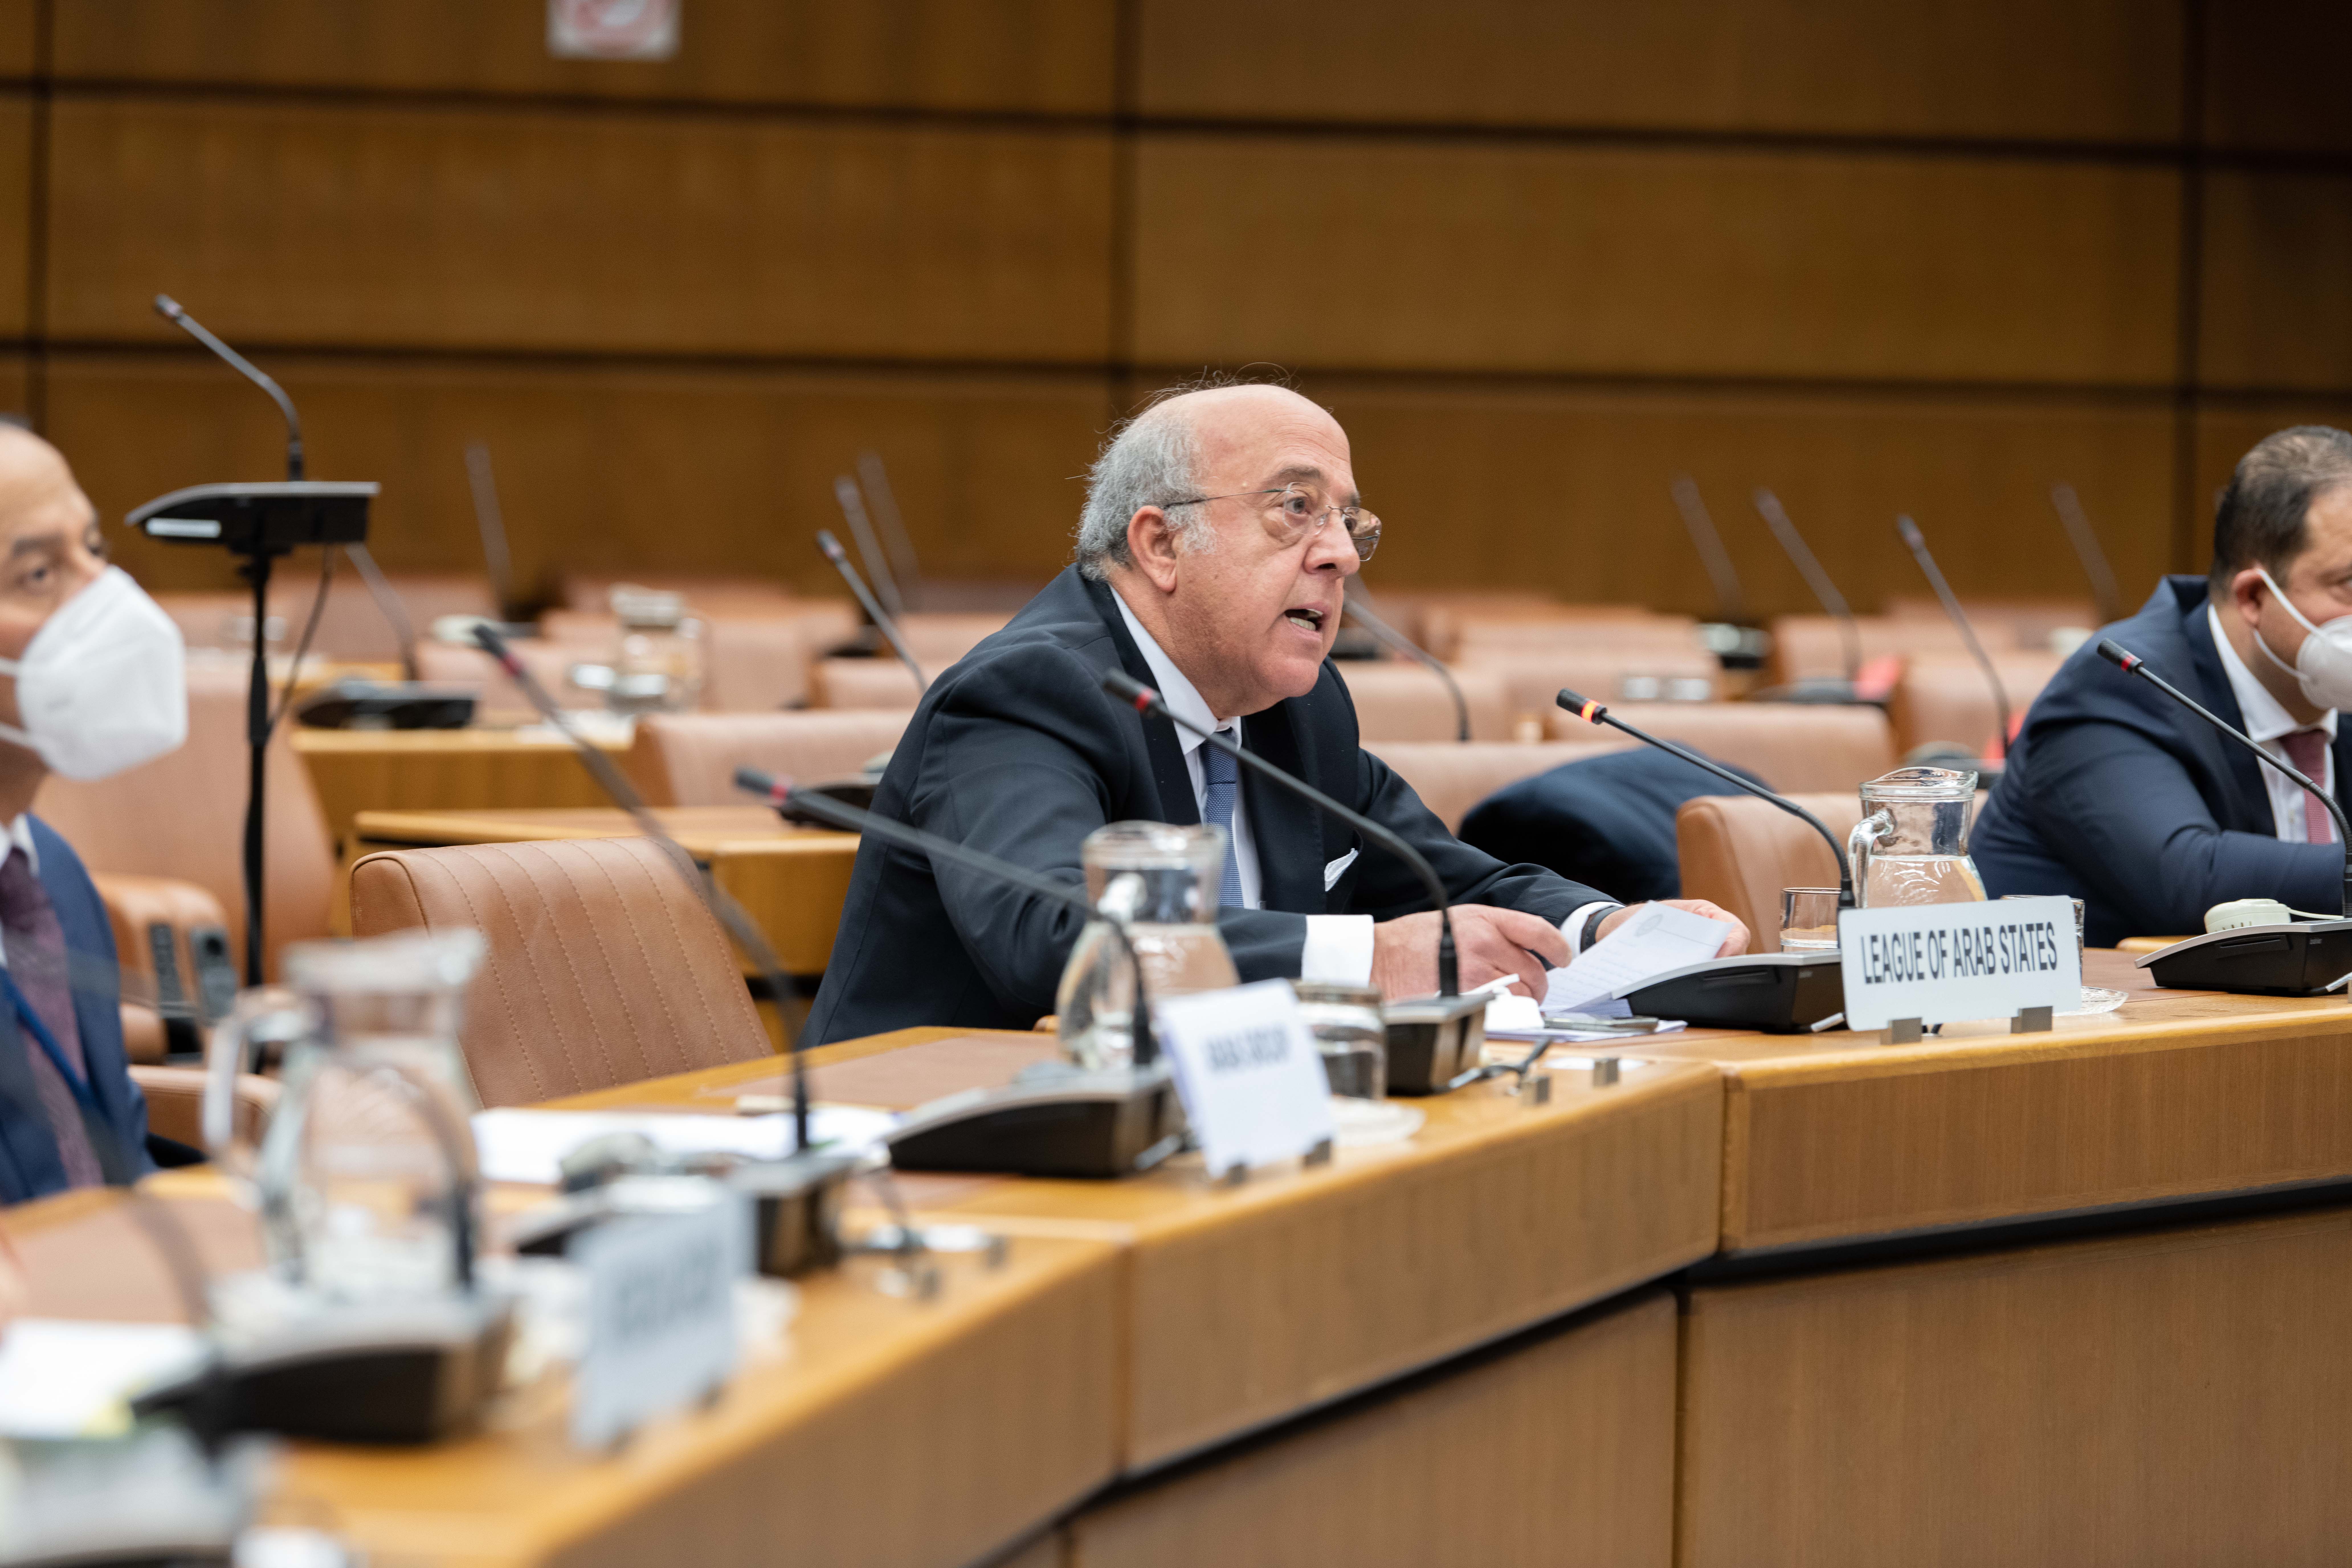 League of Arab States (statement of the Secretary-General of LAS, Mr. Ahmed Aboul Gheit) delivered by H.E. Mr. Mohamed Samir Koubaa, Head of the Permanent Observer Office of the League of Arab States to the United Nations (Vienna) (in-person)